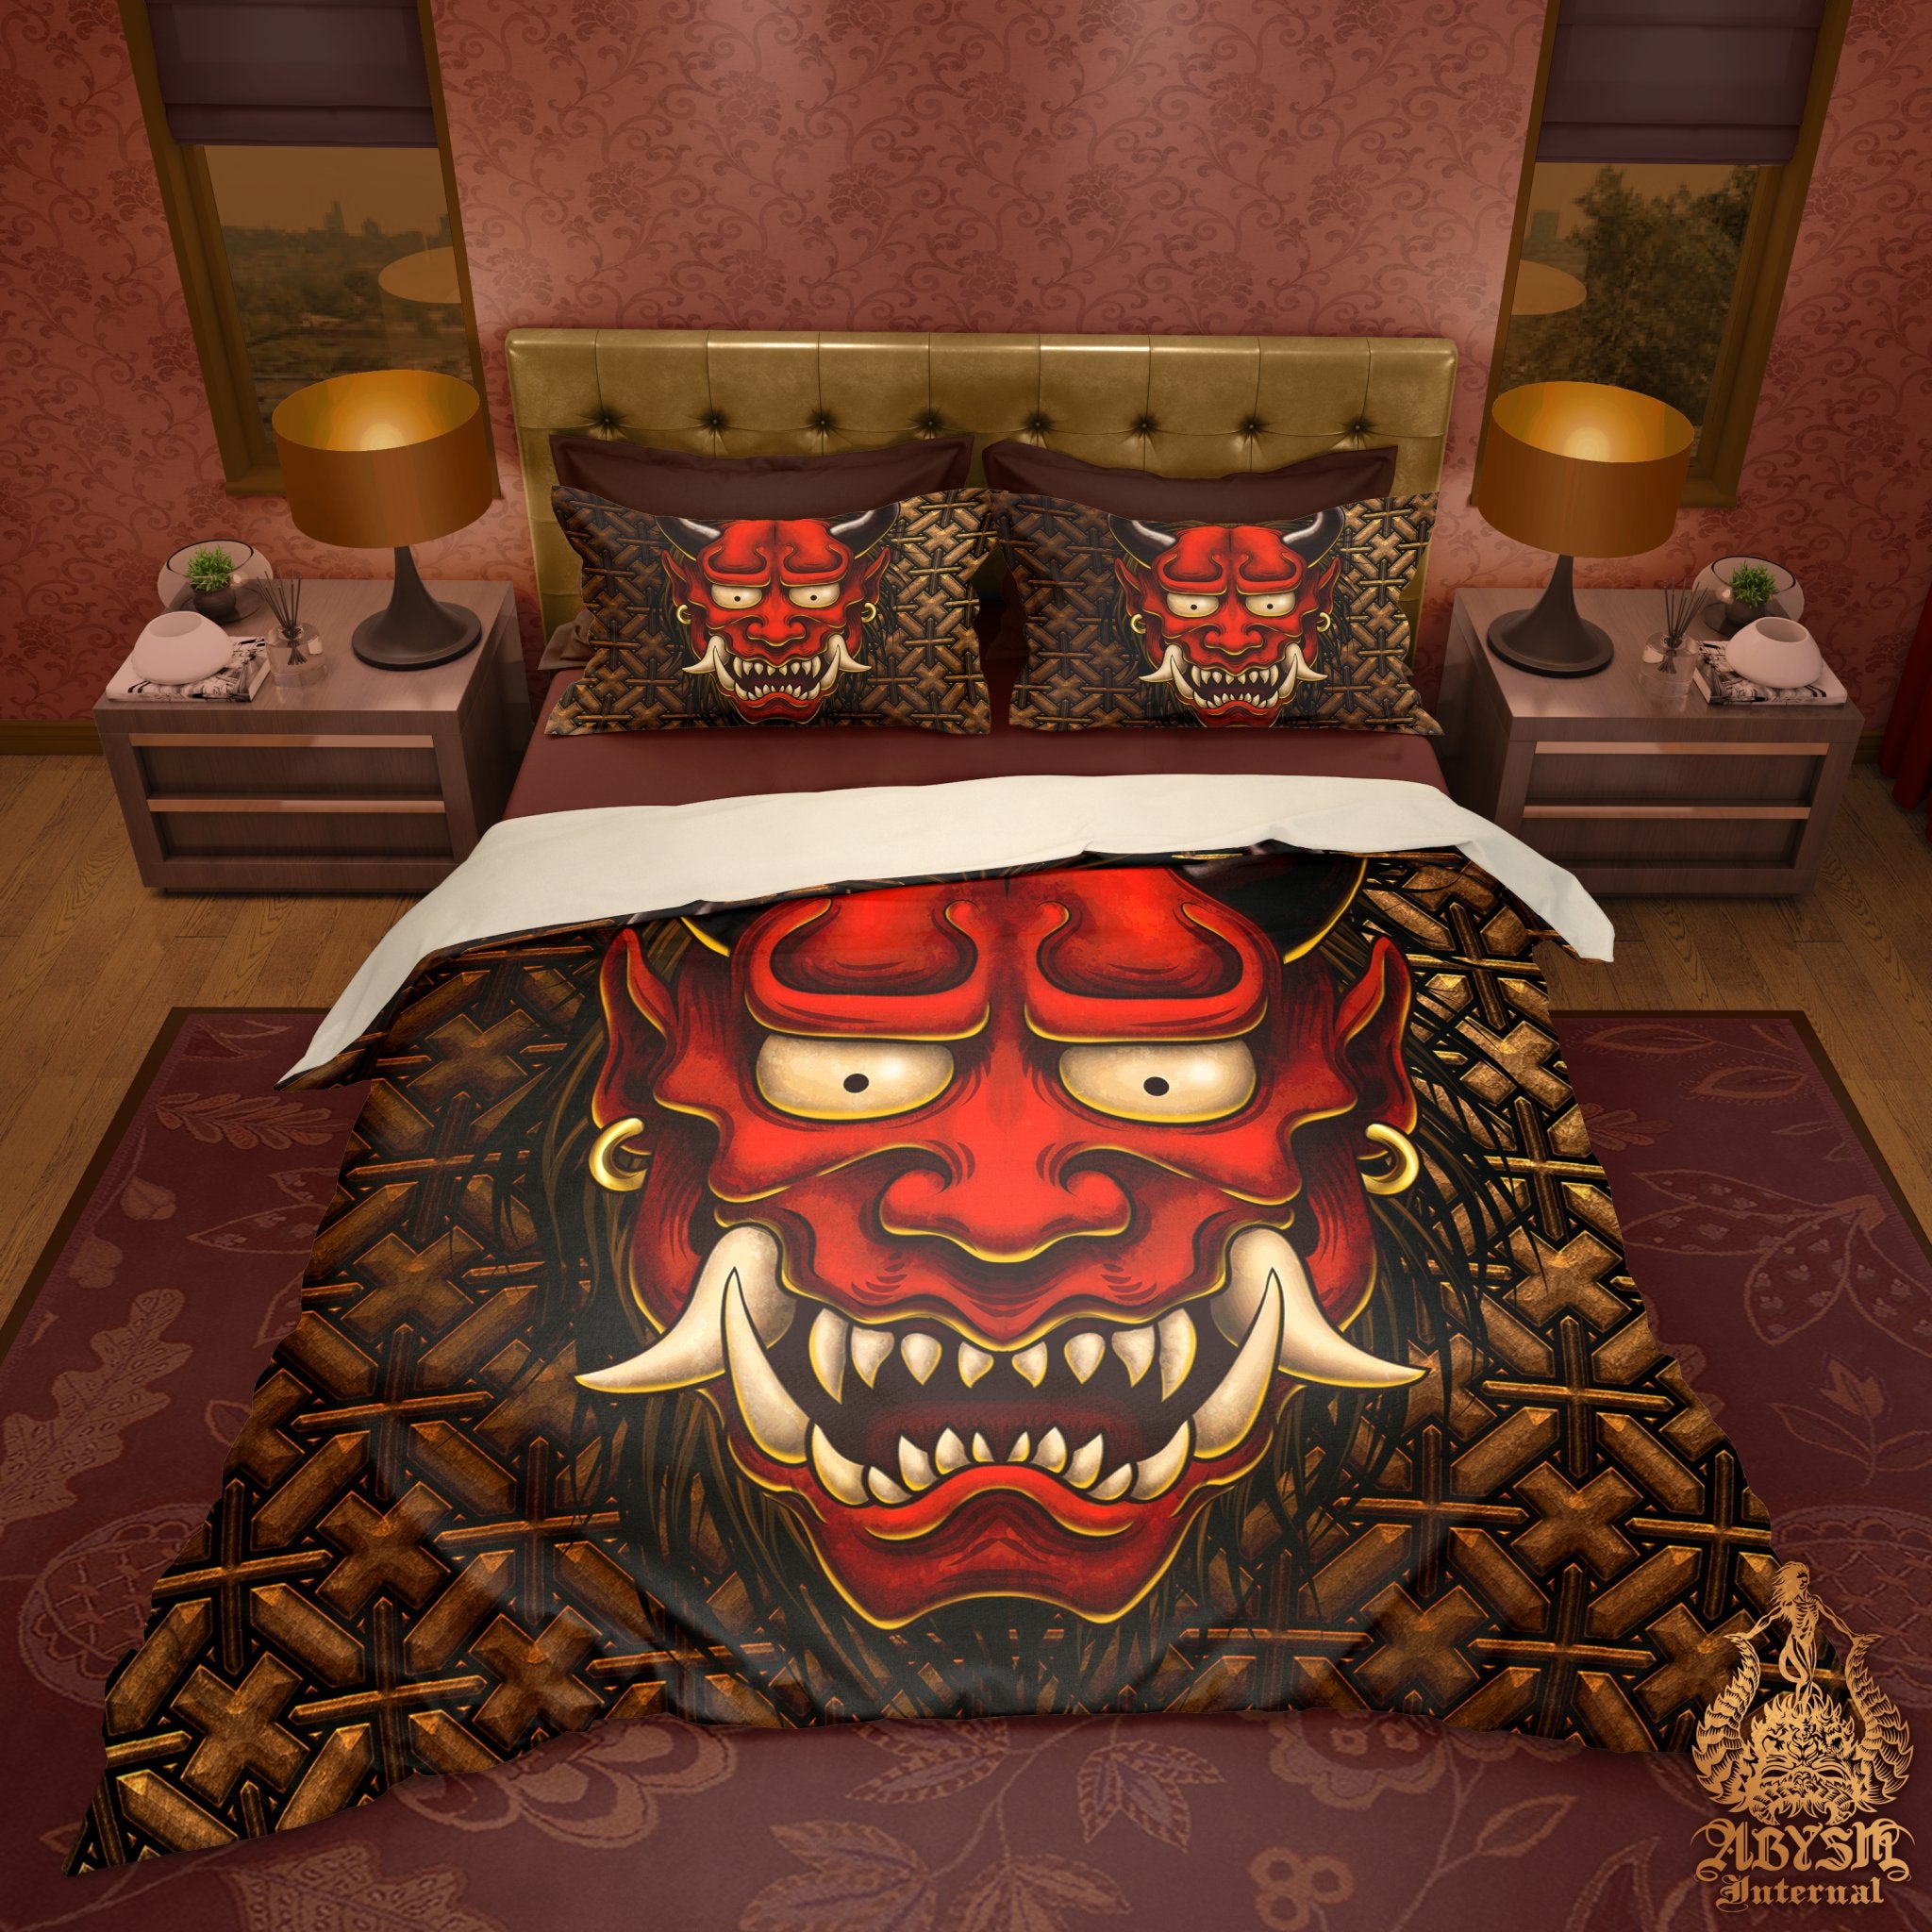 Oni Bedding Set, Comforter or Duvet, Anime Bed Cover, Bedroom Decor, King, Queen & Twin Size - White or Red Japanese Demon, Original 2 Colors - Abysm Internal